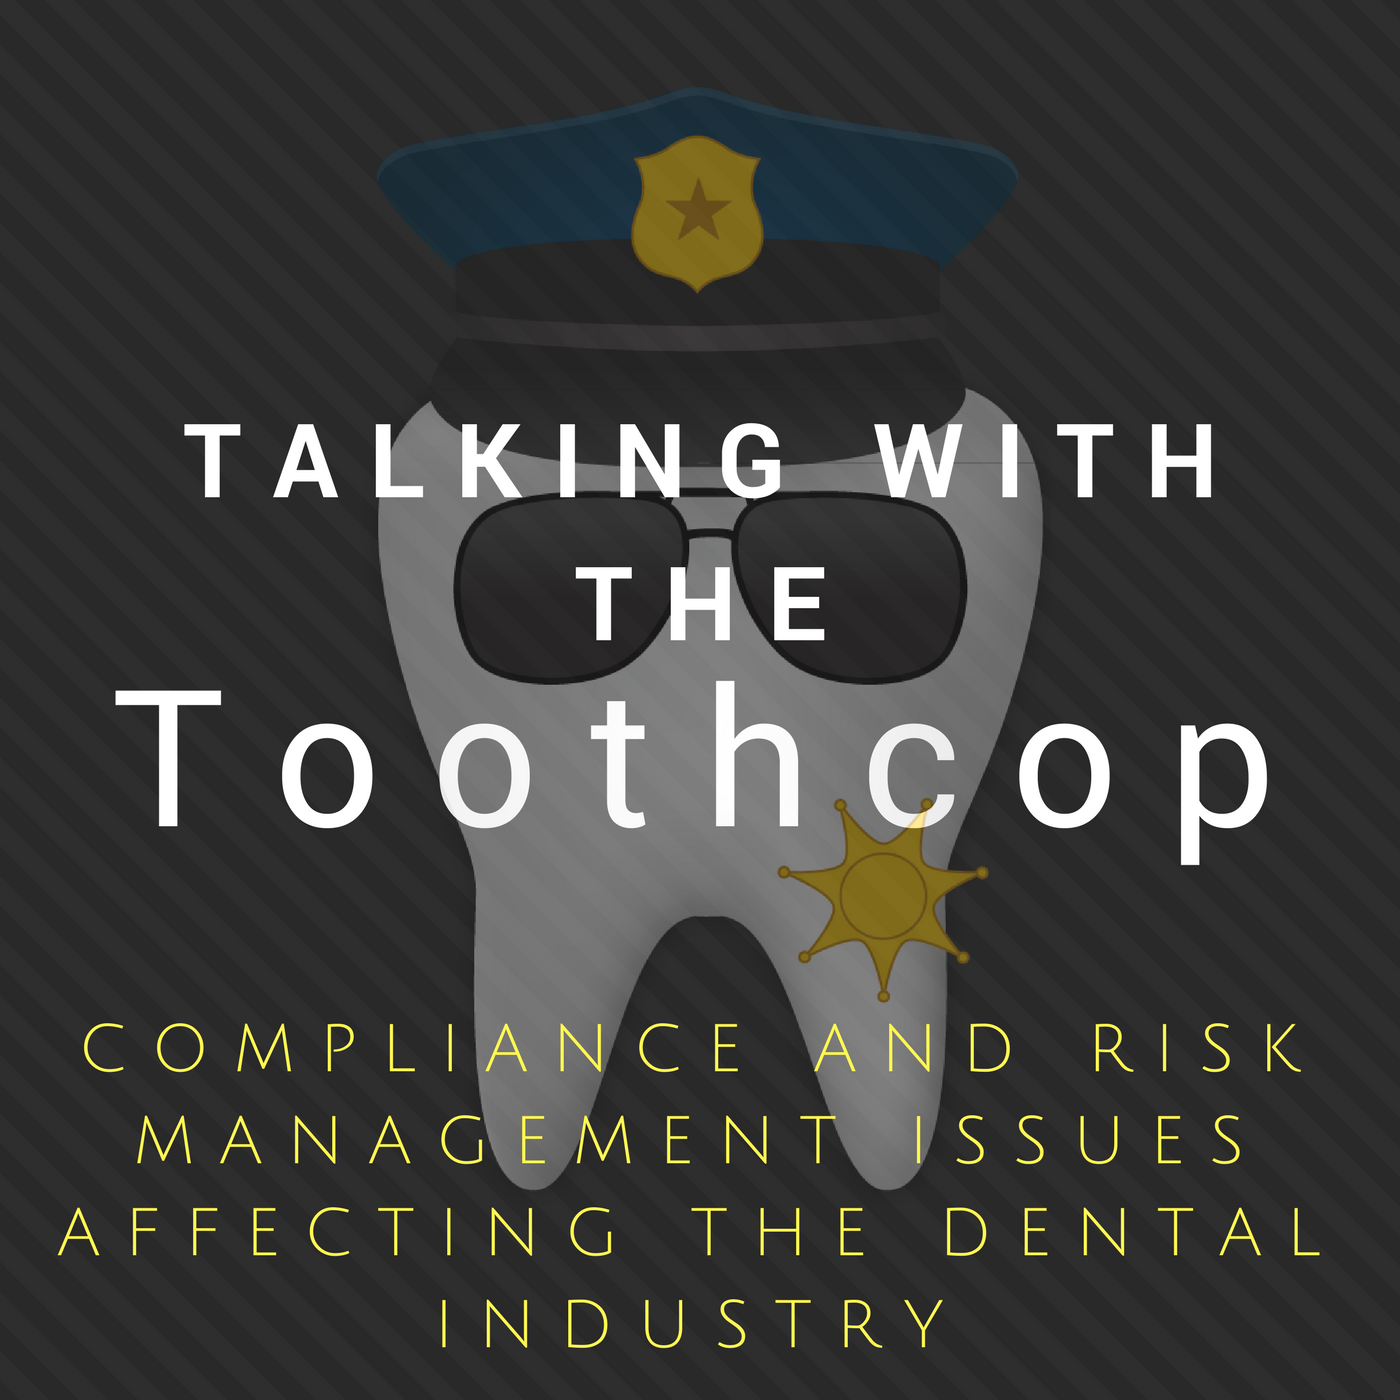 Why And How To Create A Safety Culture In Your Dental Practice